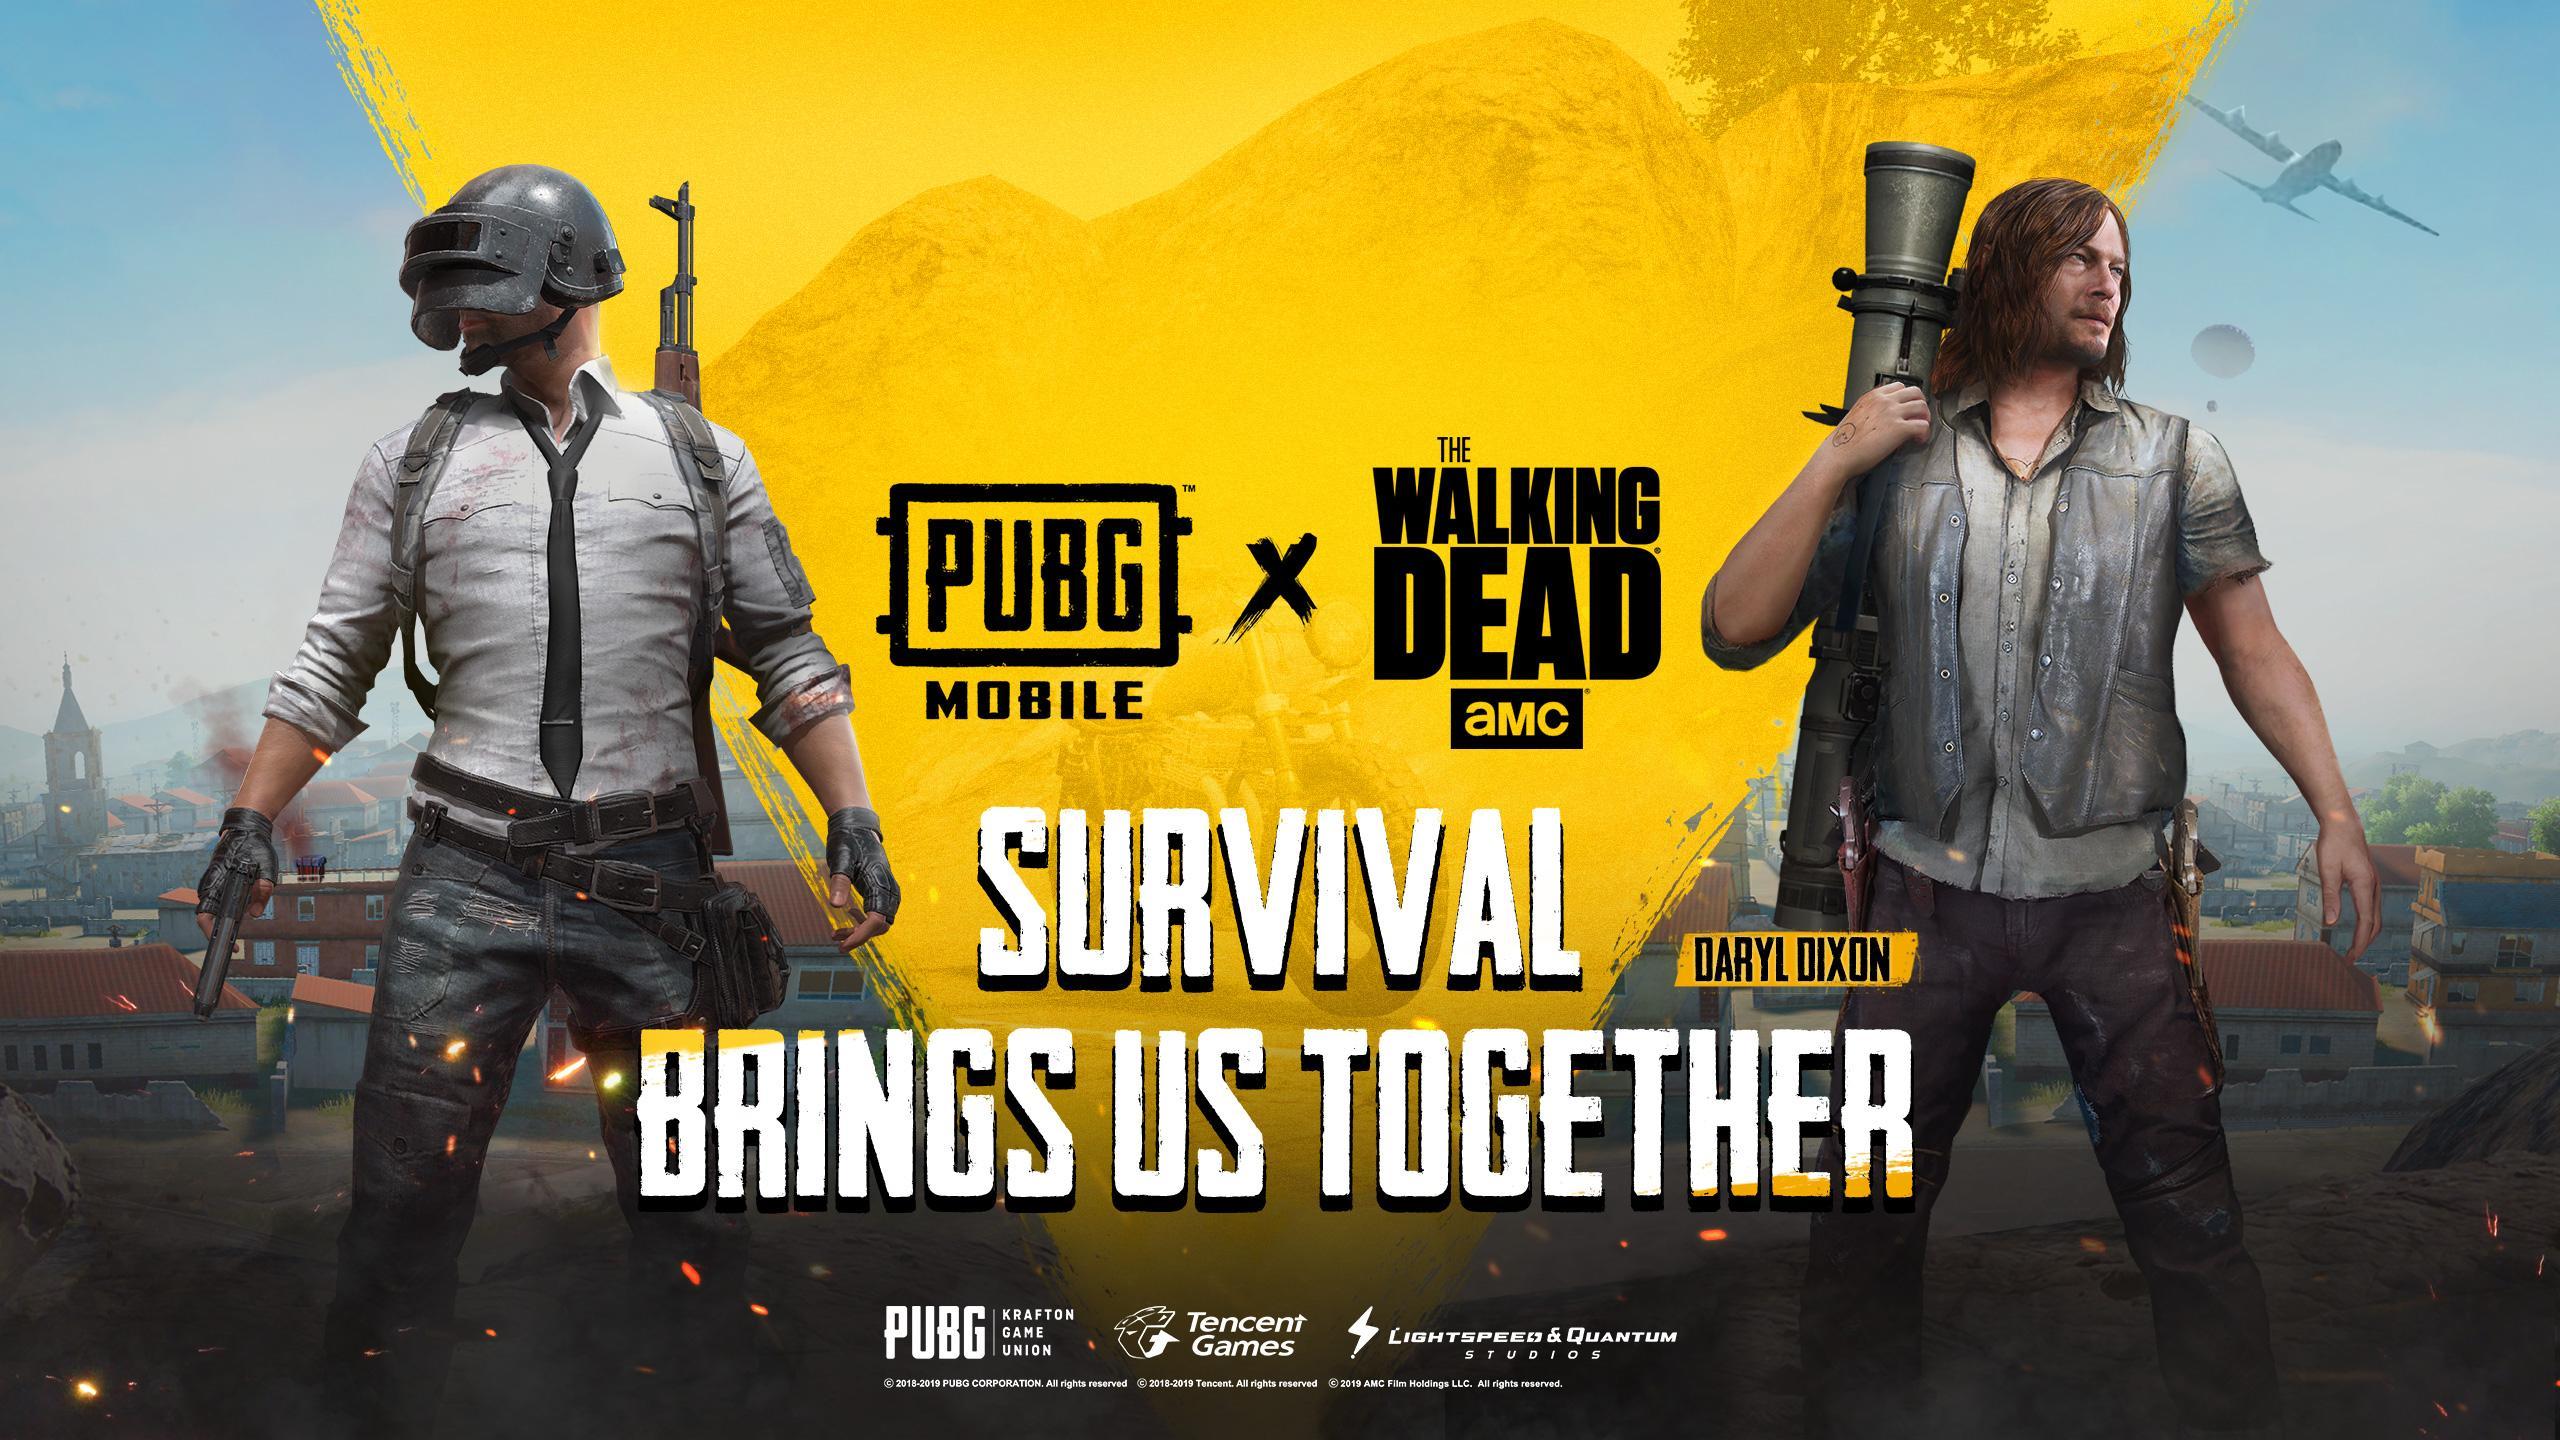 PUBG Mobile Teams Up with The Walking Dead for Newest Event